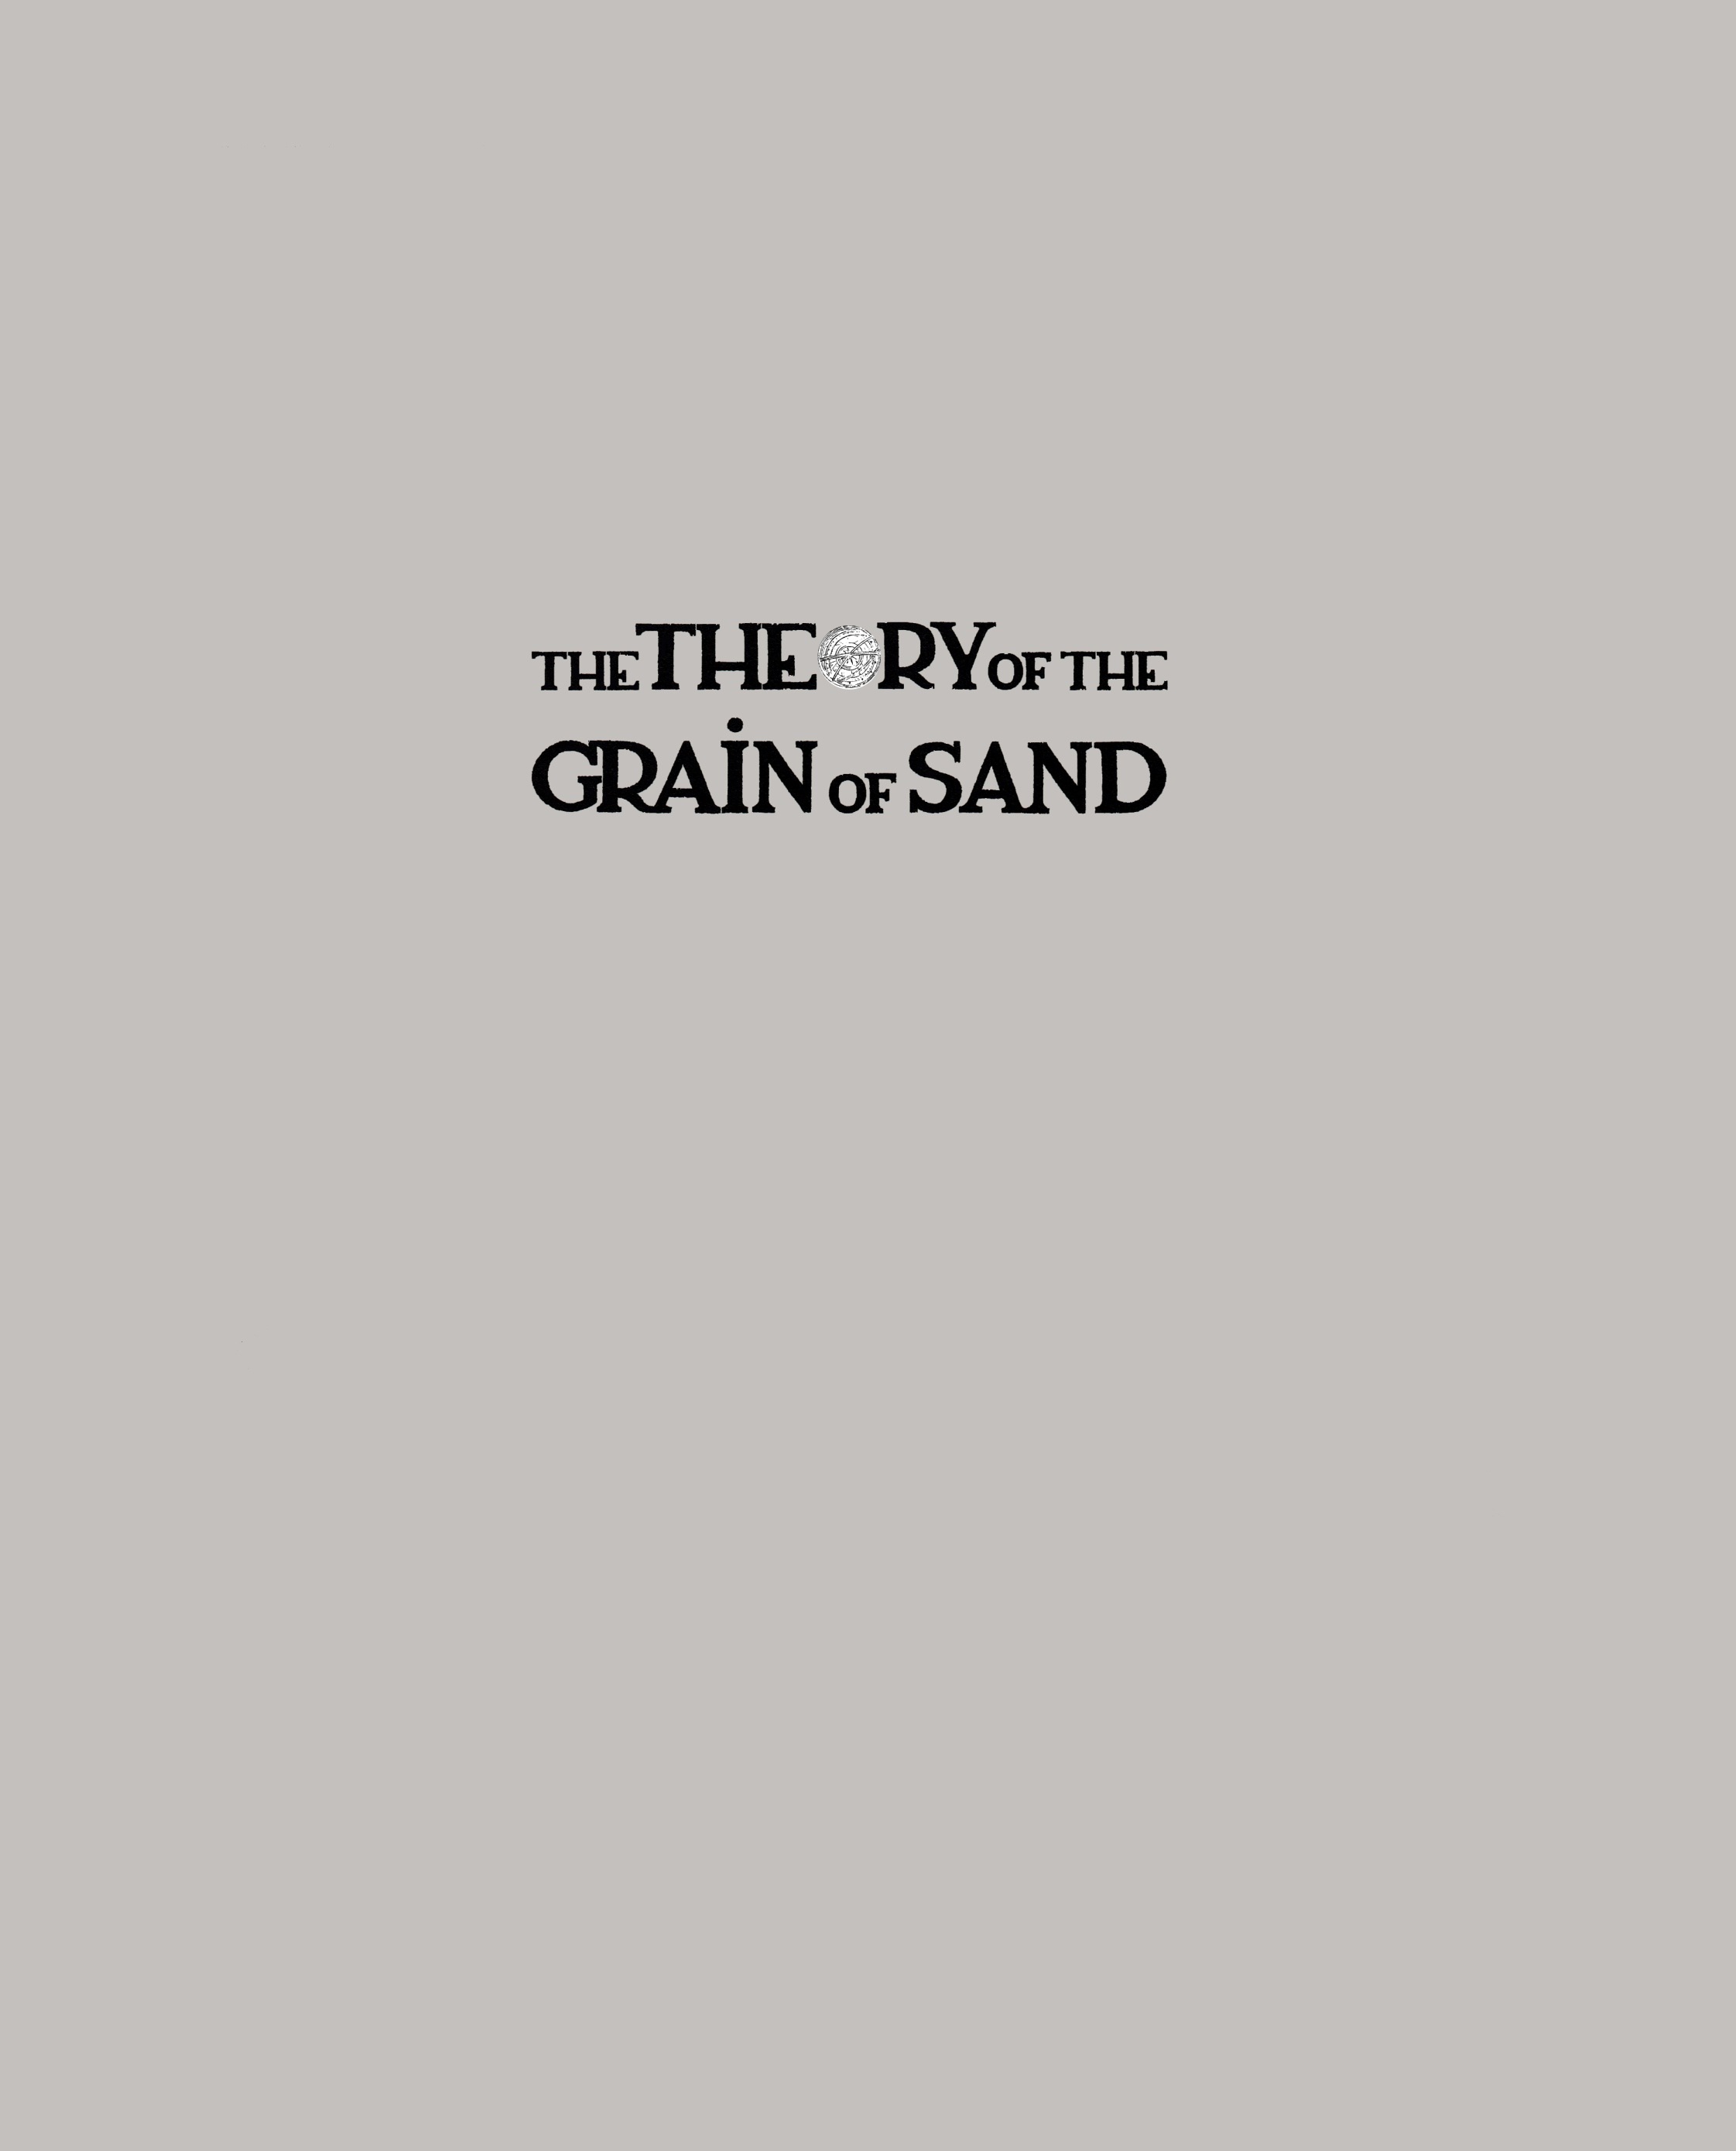 Read online Theory of the Grain of Sand comic -  Issue # TPB - 4